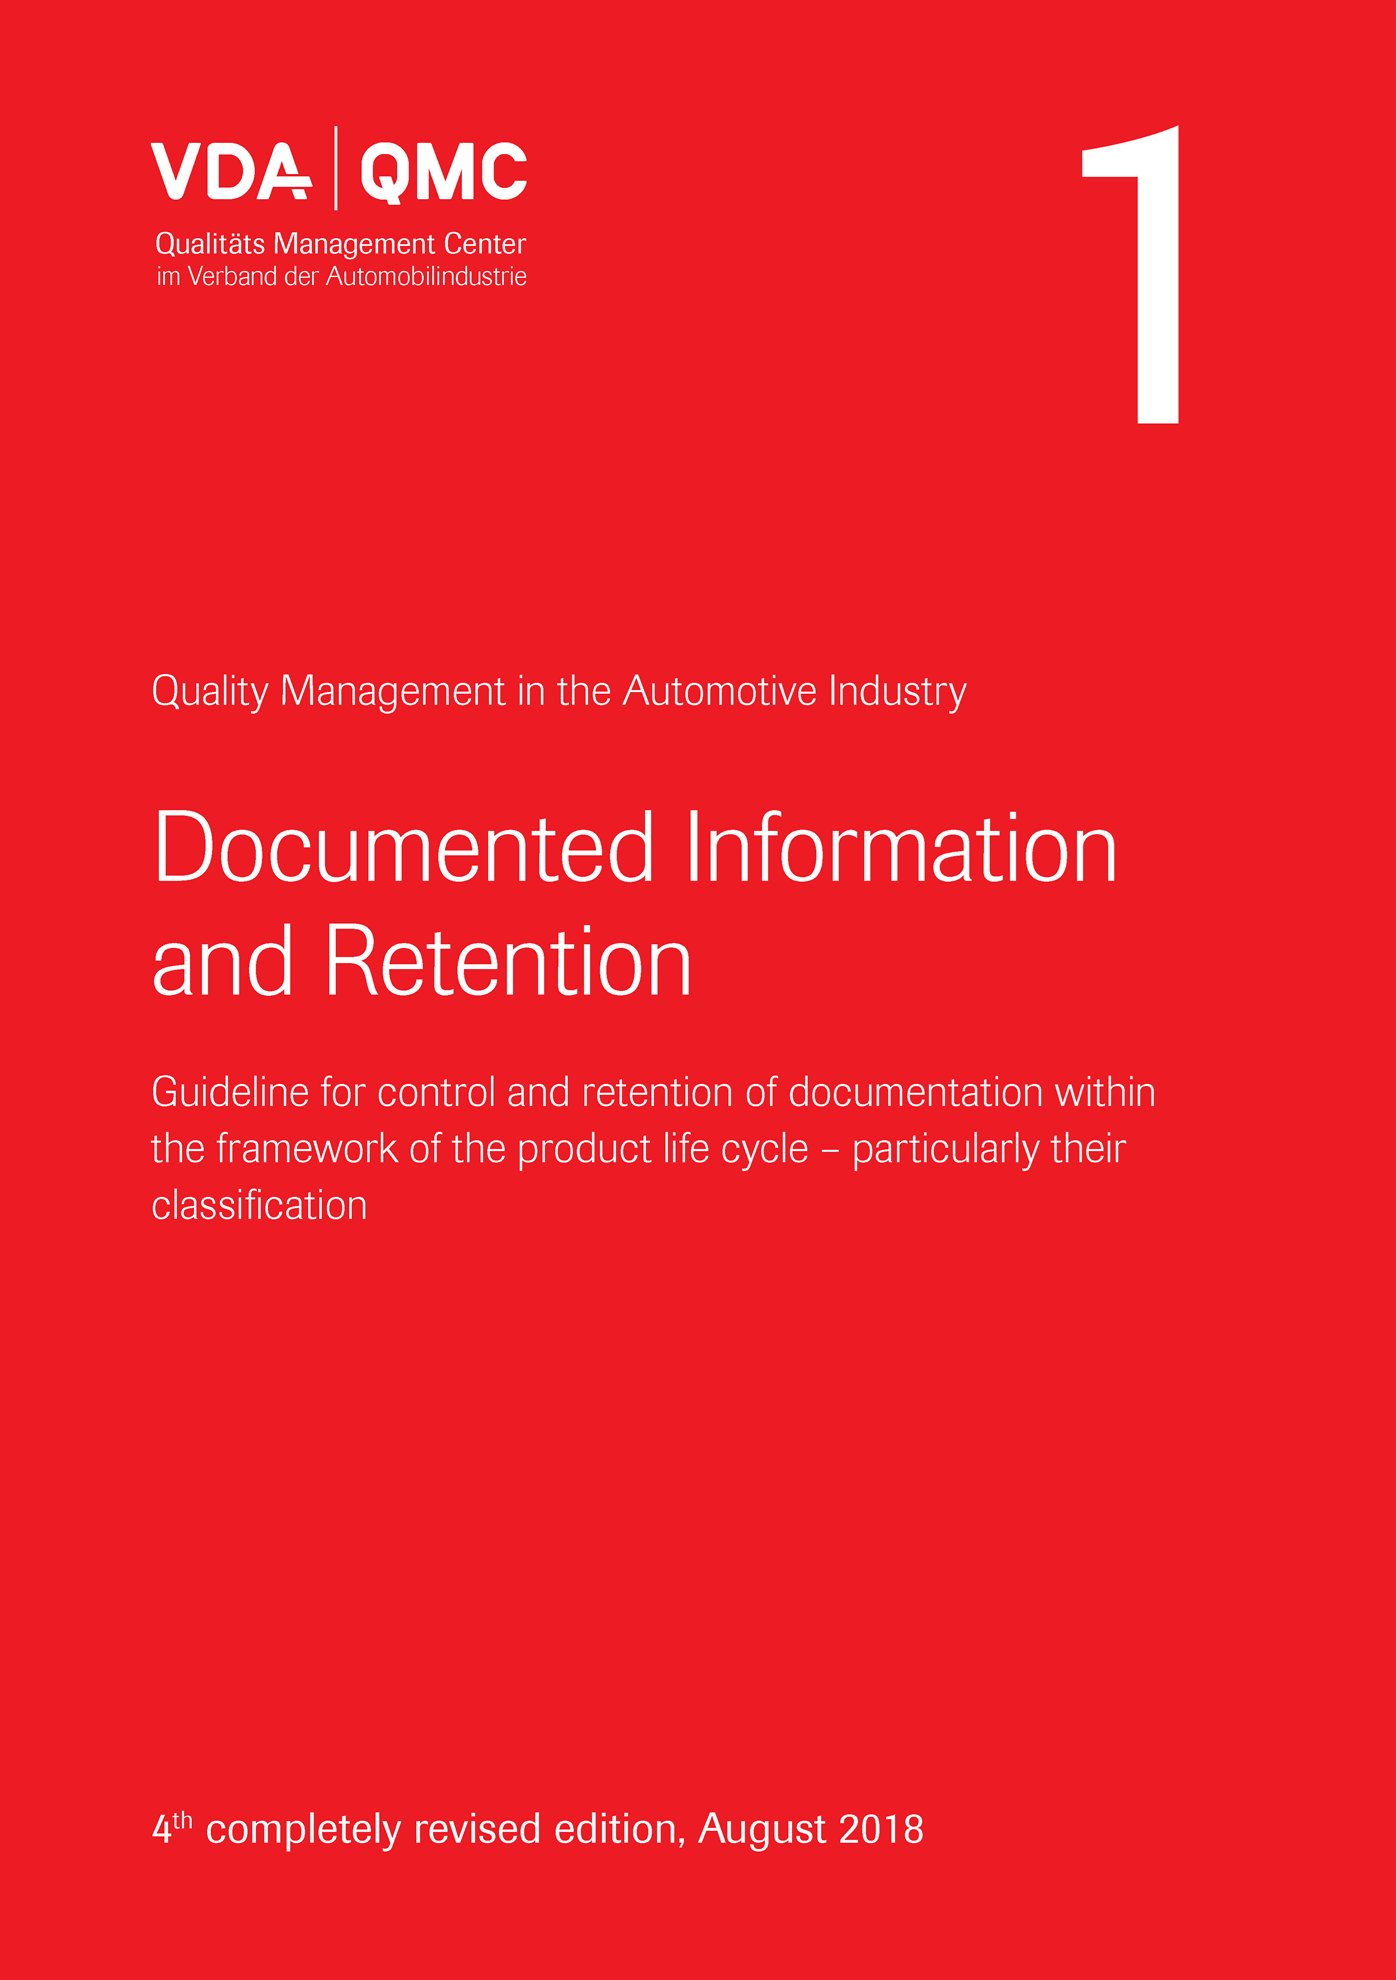 Publikácie  VDA Volume 1 - Documented Information and Retention, 4th completely revised edition, August 2018 1.8.2018 náhľad